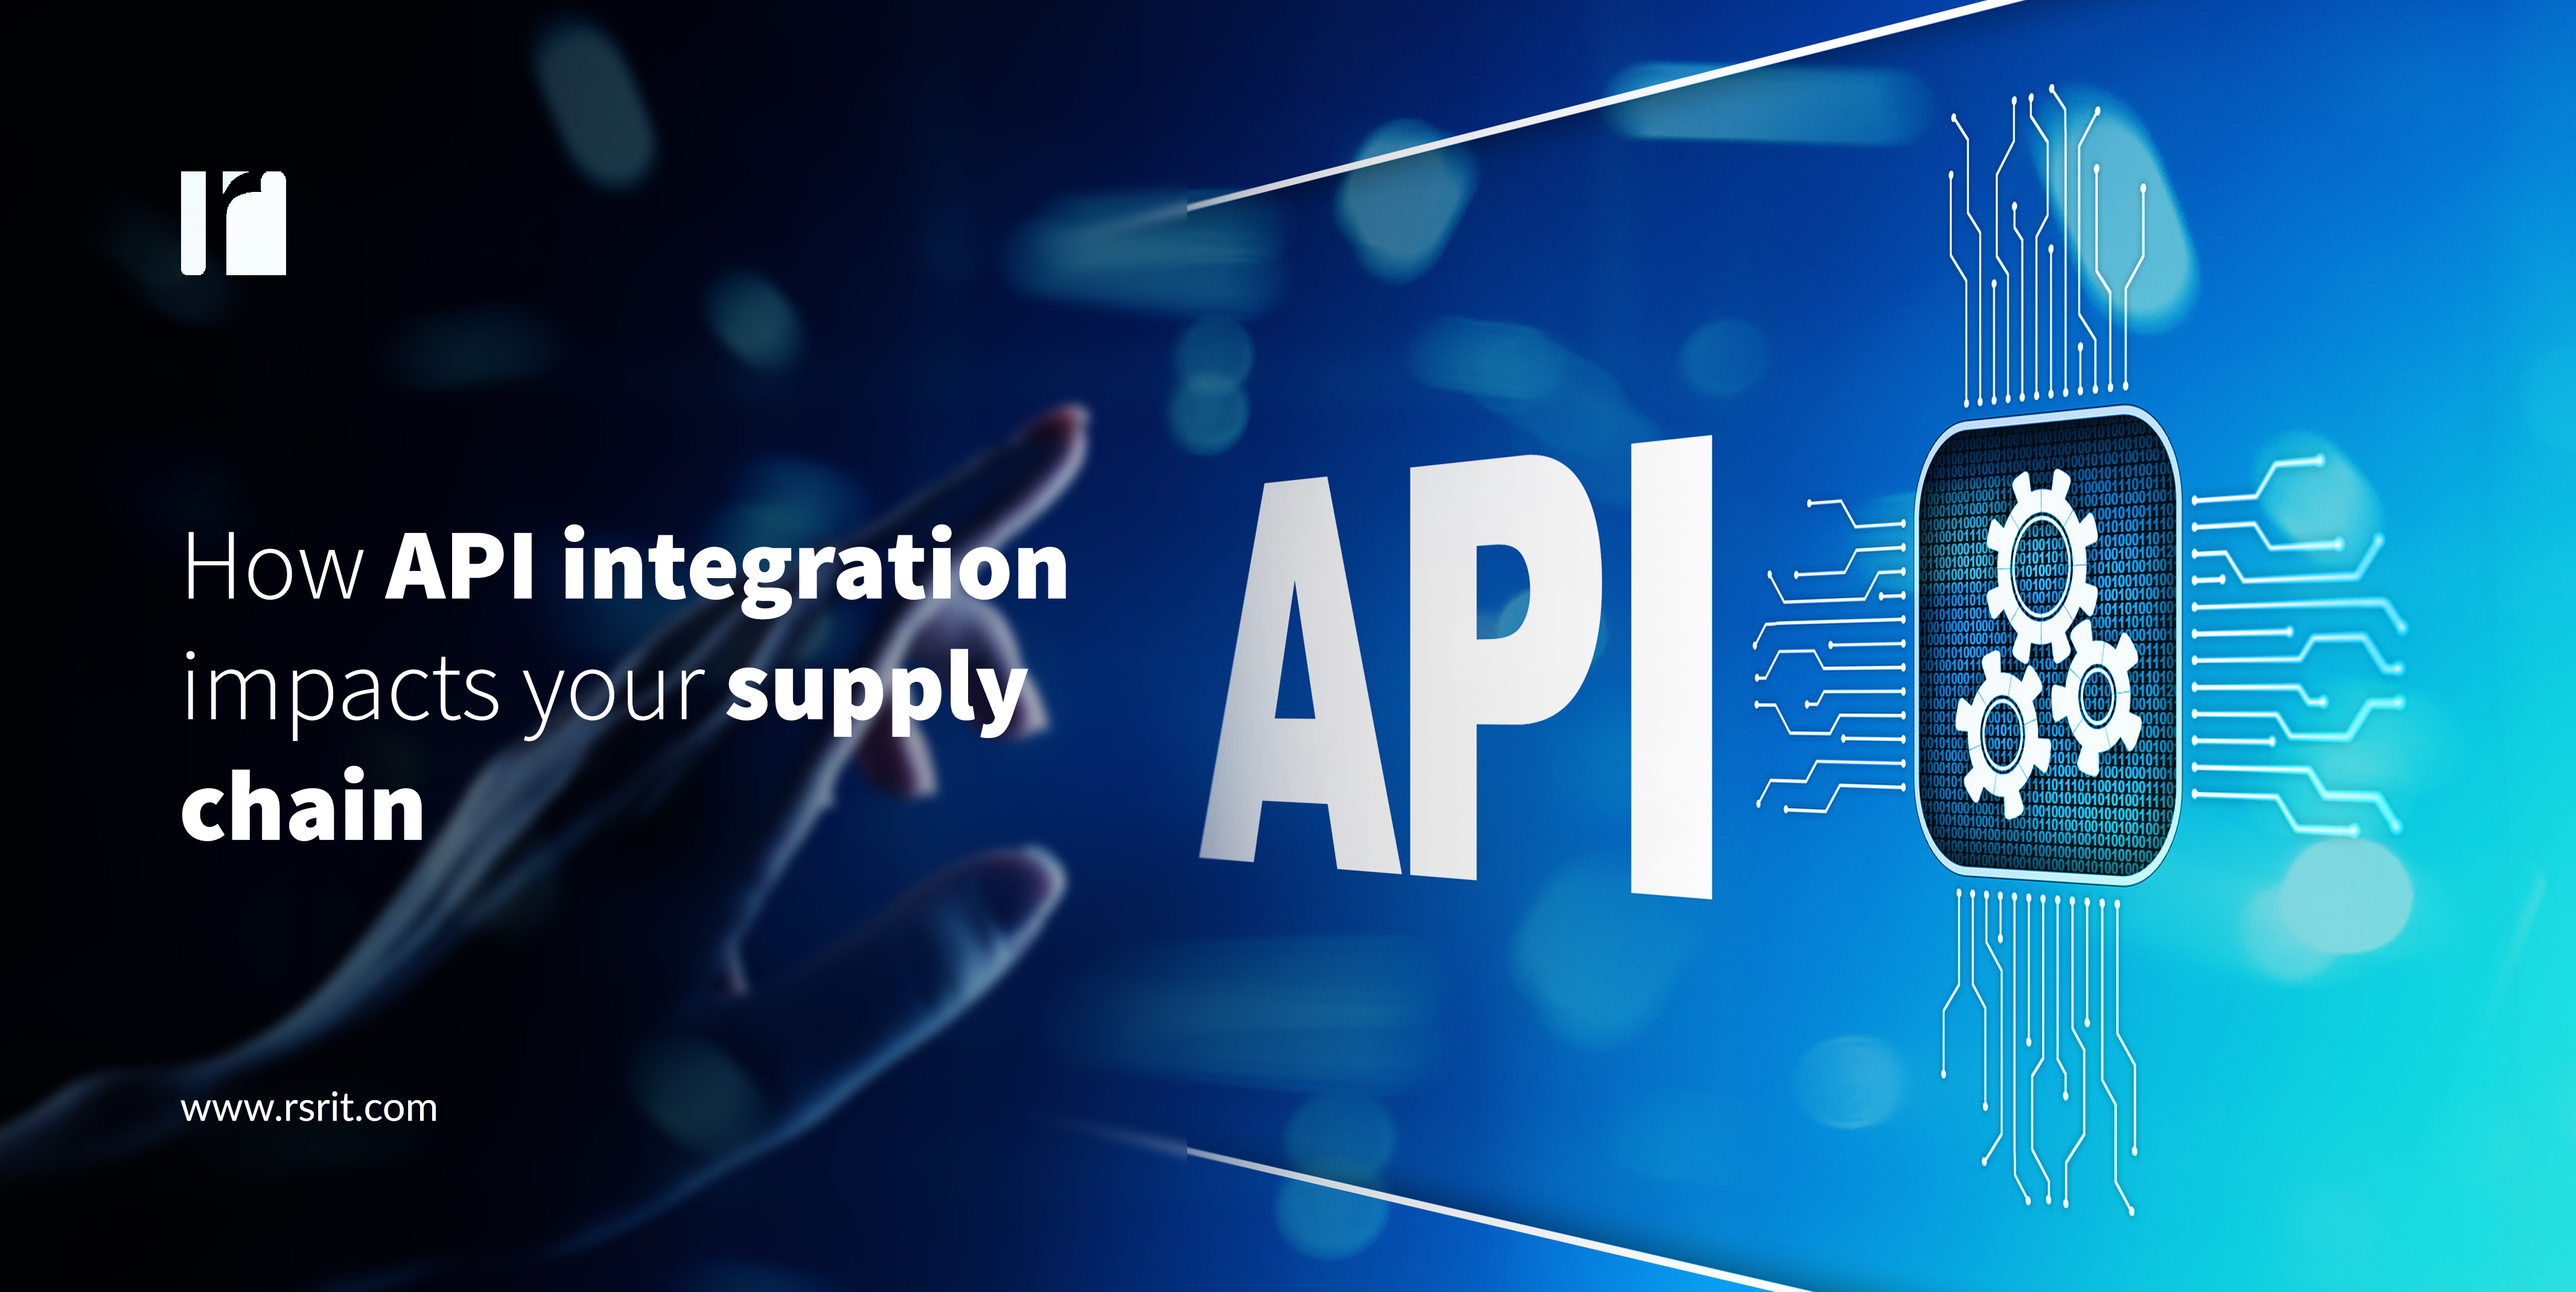 How API integration impacts your supply chain